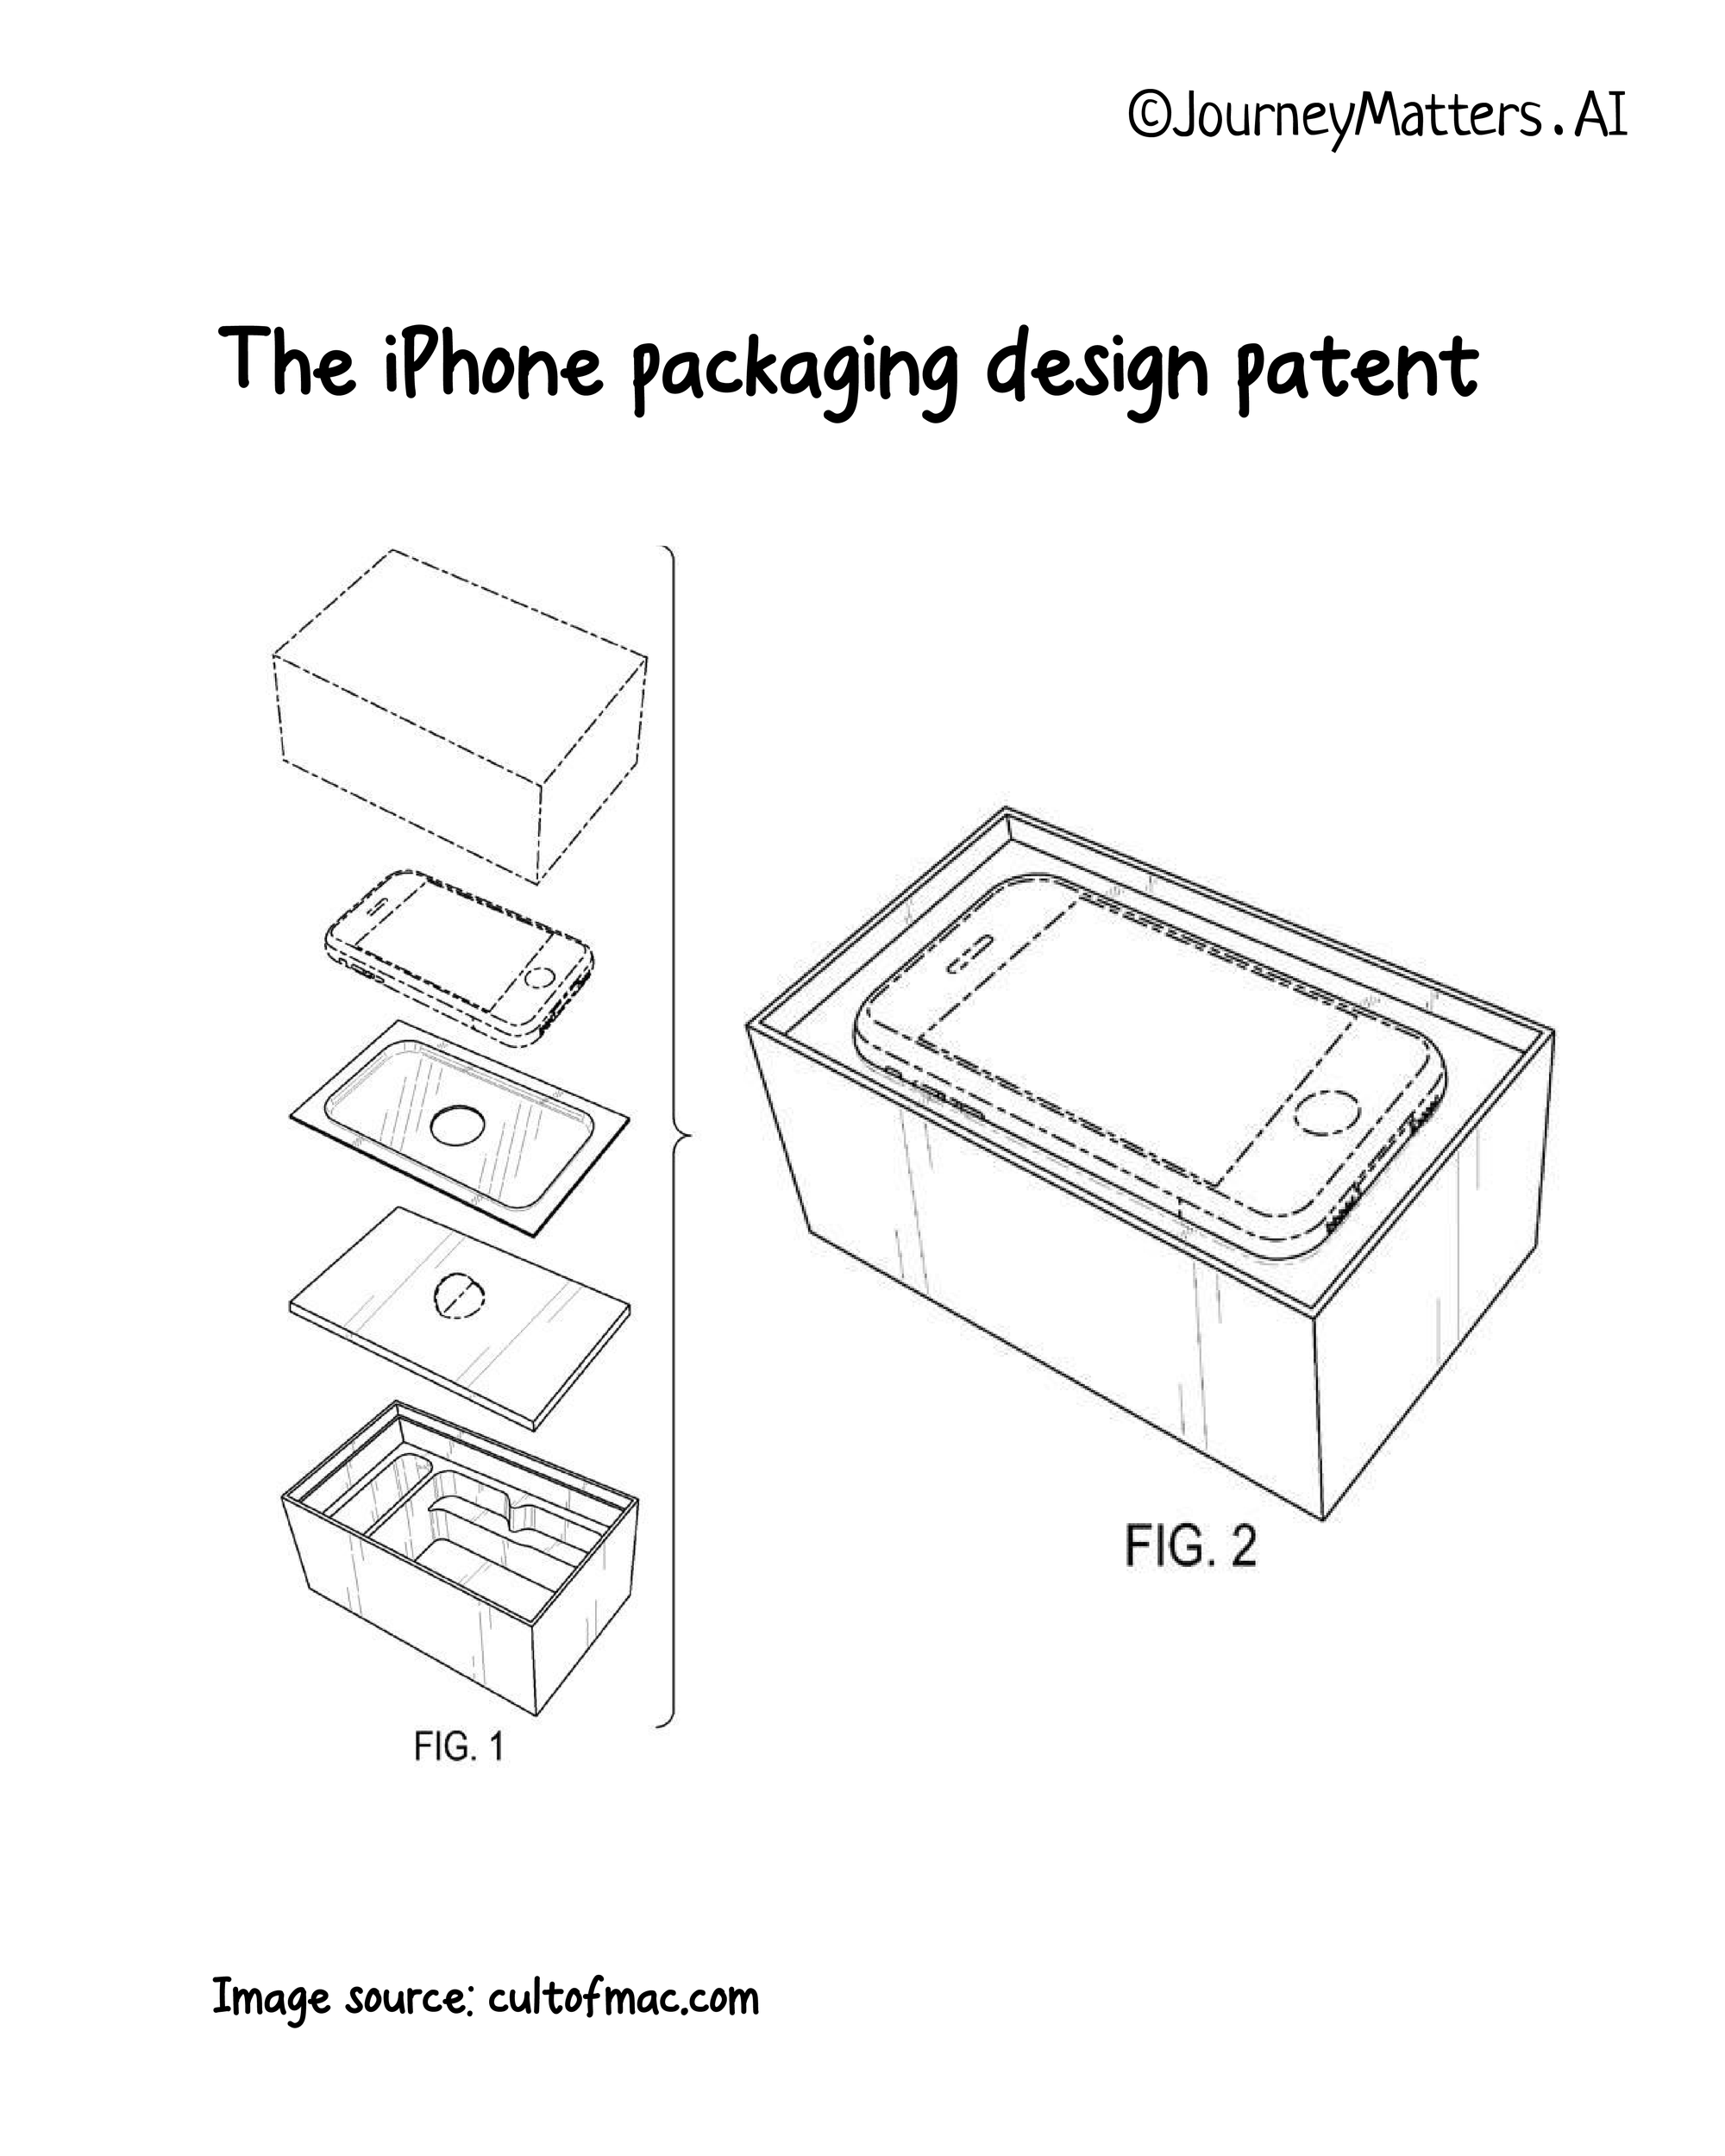 Along with the 200+ patents, the iPhone case is also one of them